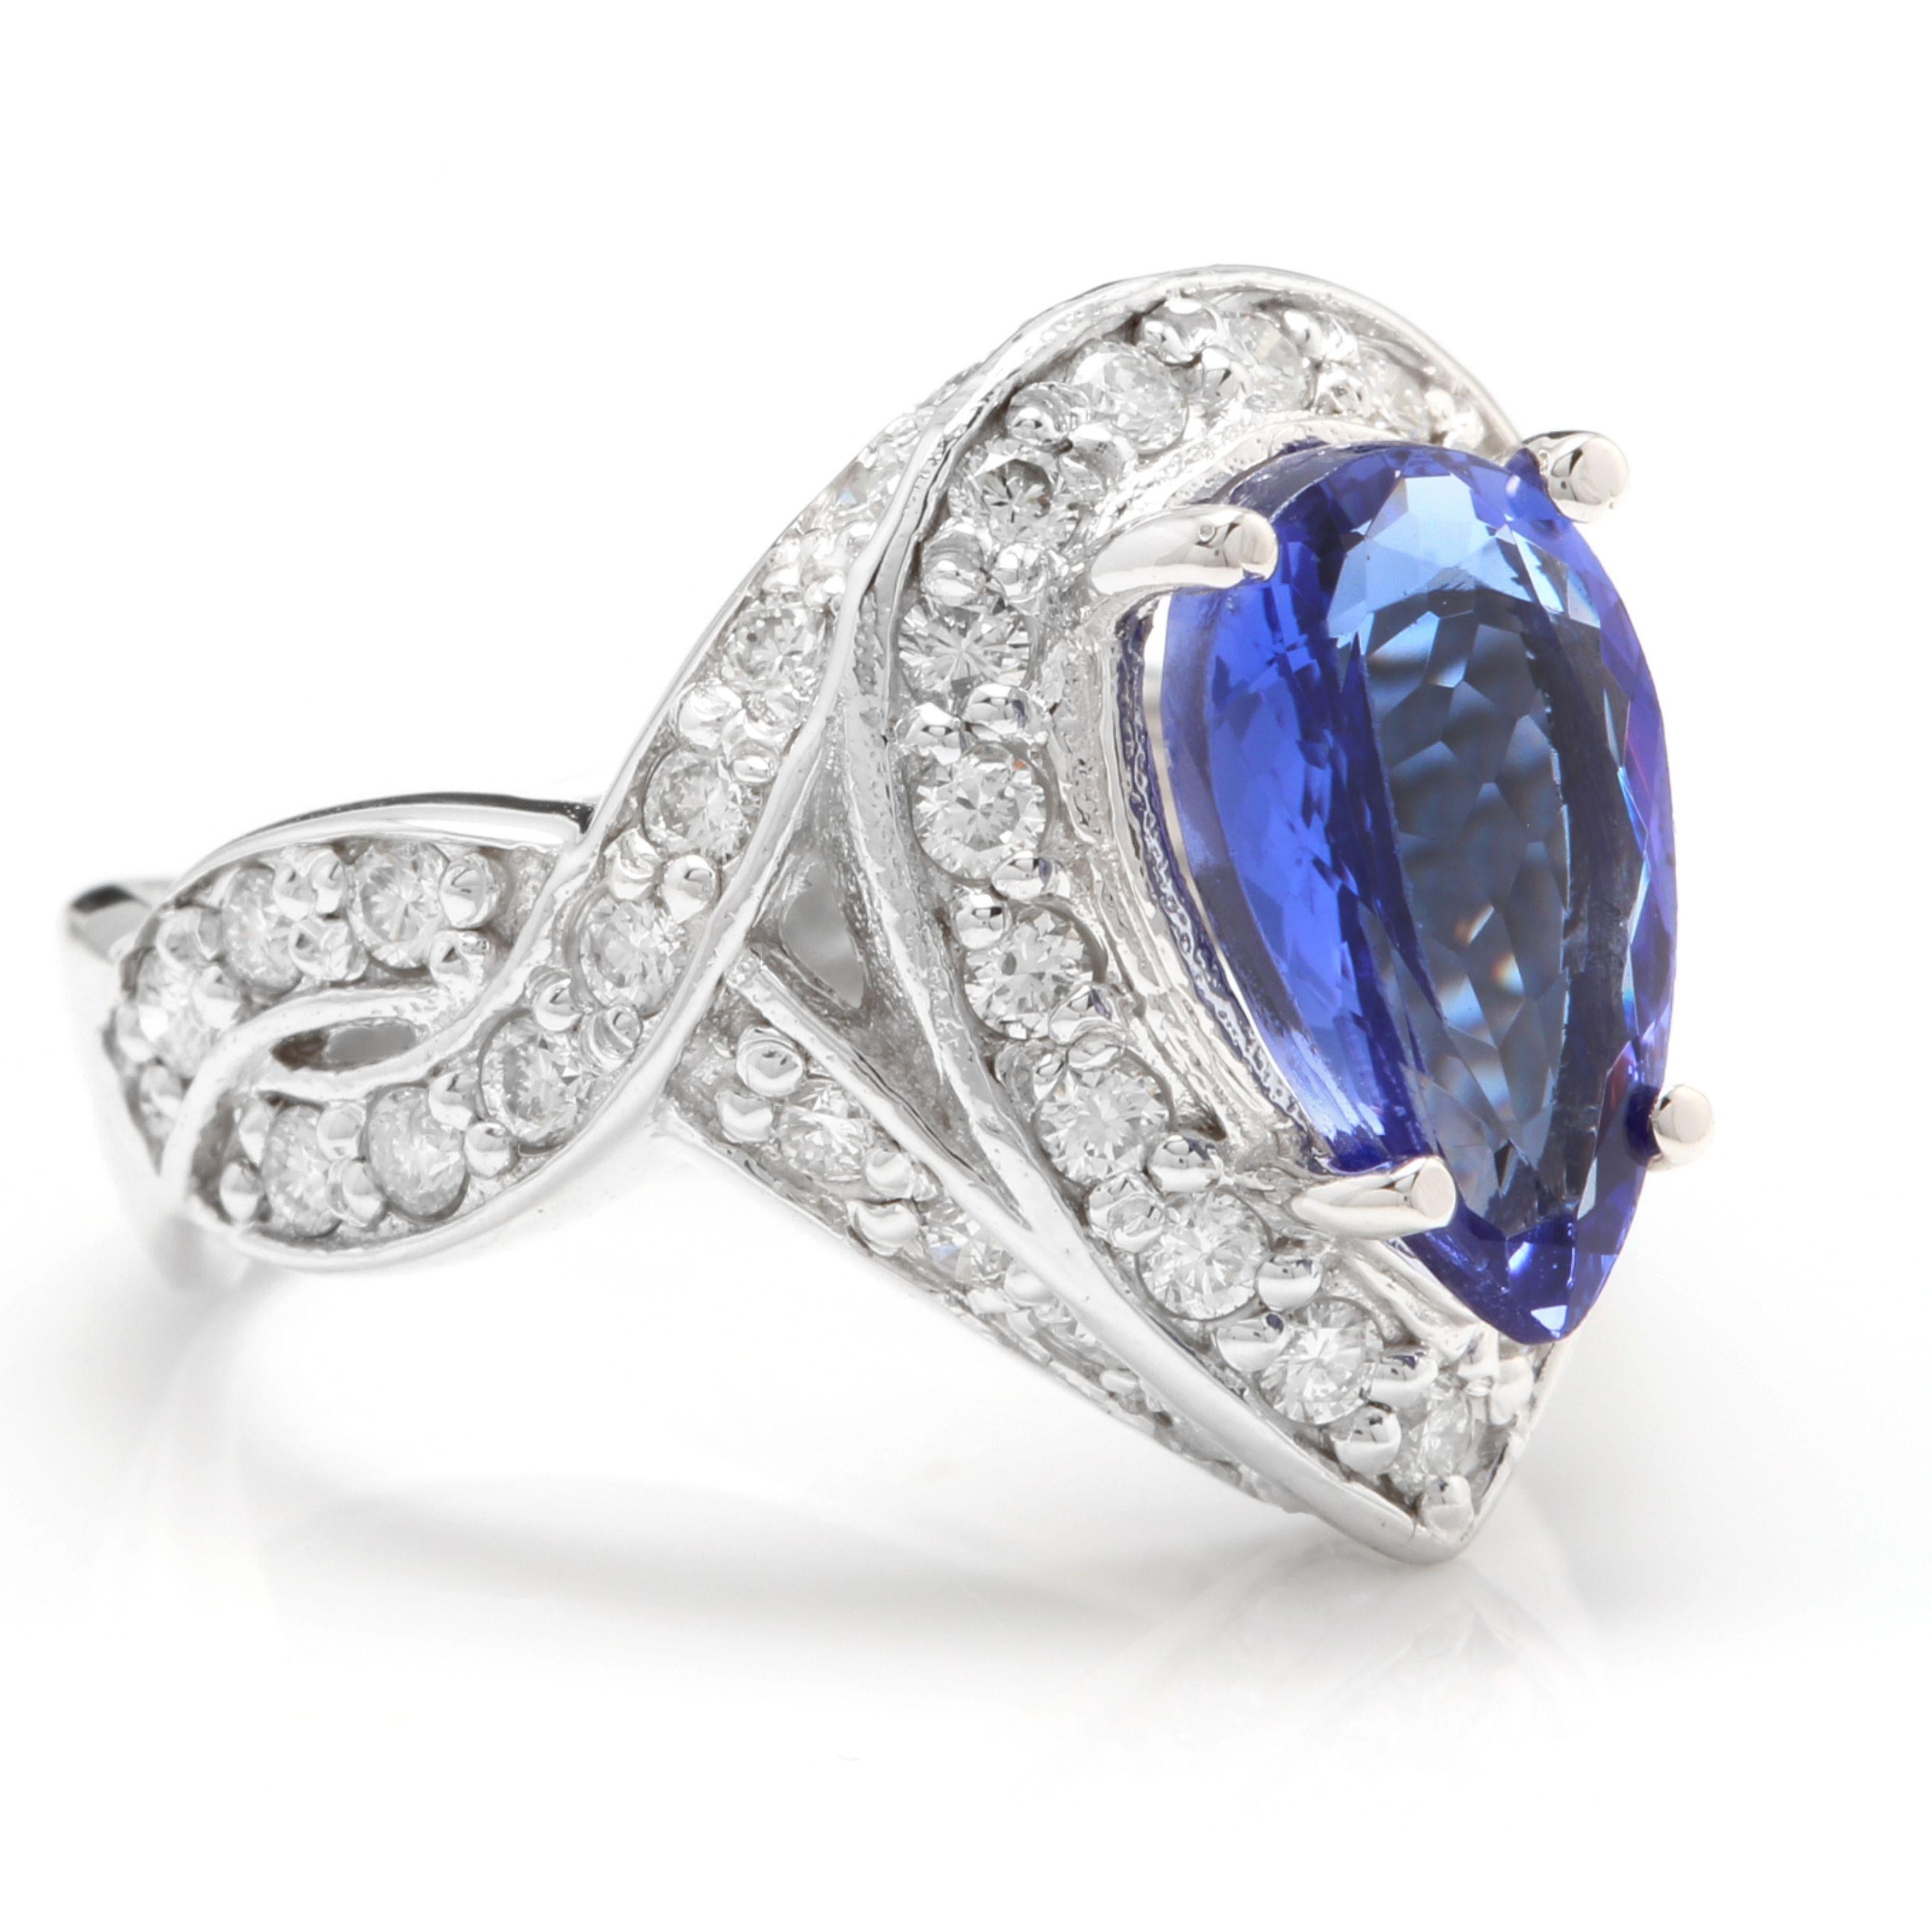 4.80 Carats Natural Very Nice Looking Tanzanite and Diamond 14K Solid White Gold Ring

Total Natural Pear Shaped Tanzanite Weight is: Approx. 3.30 Carats

Tanzanite Measures: Approx. 12.00 x 8.00mm

Natural Round Diamonds Weight: Approx. 1.50 Carats